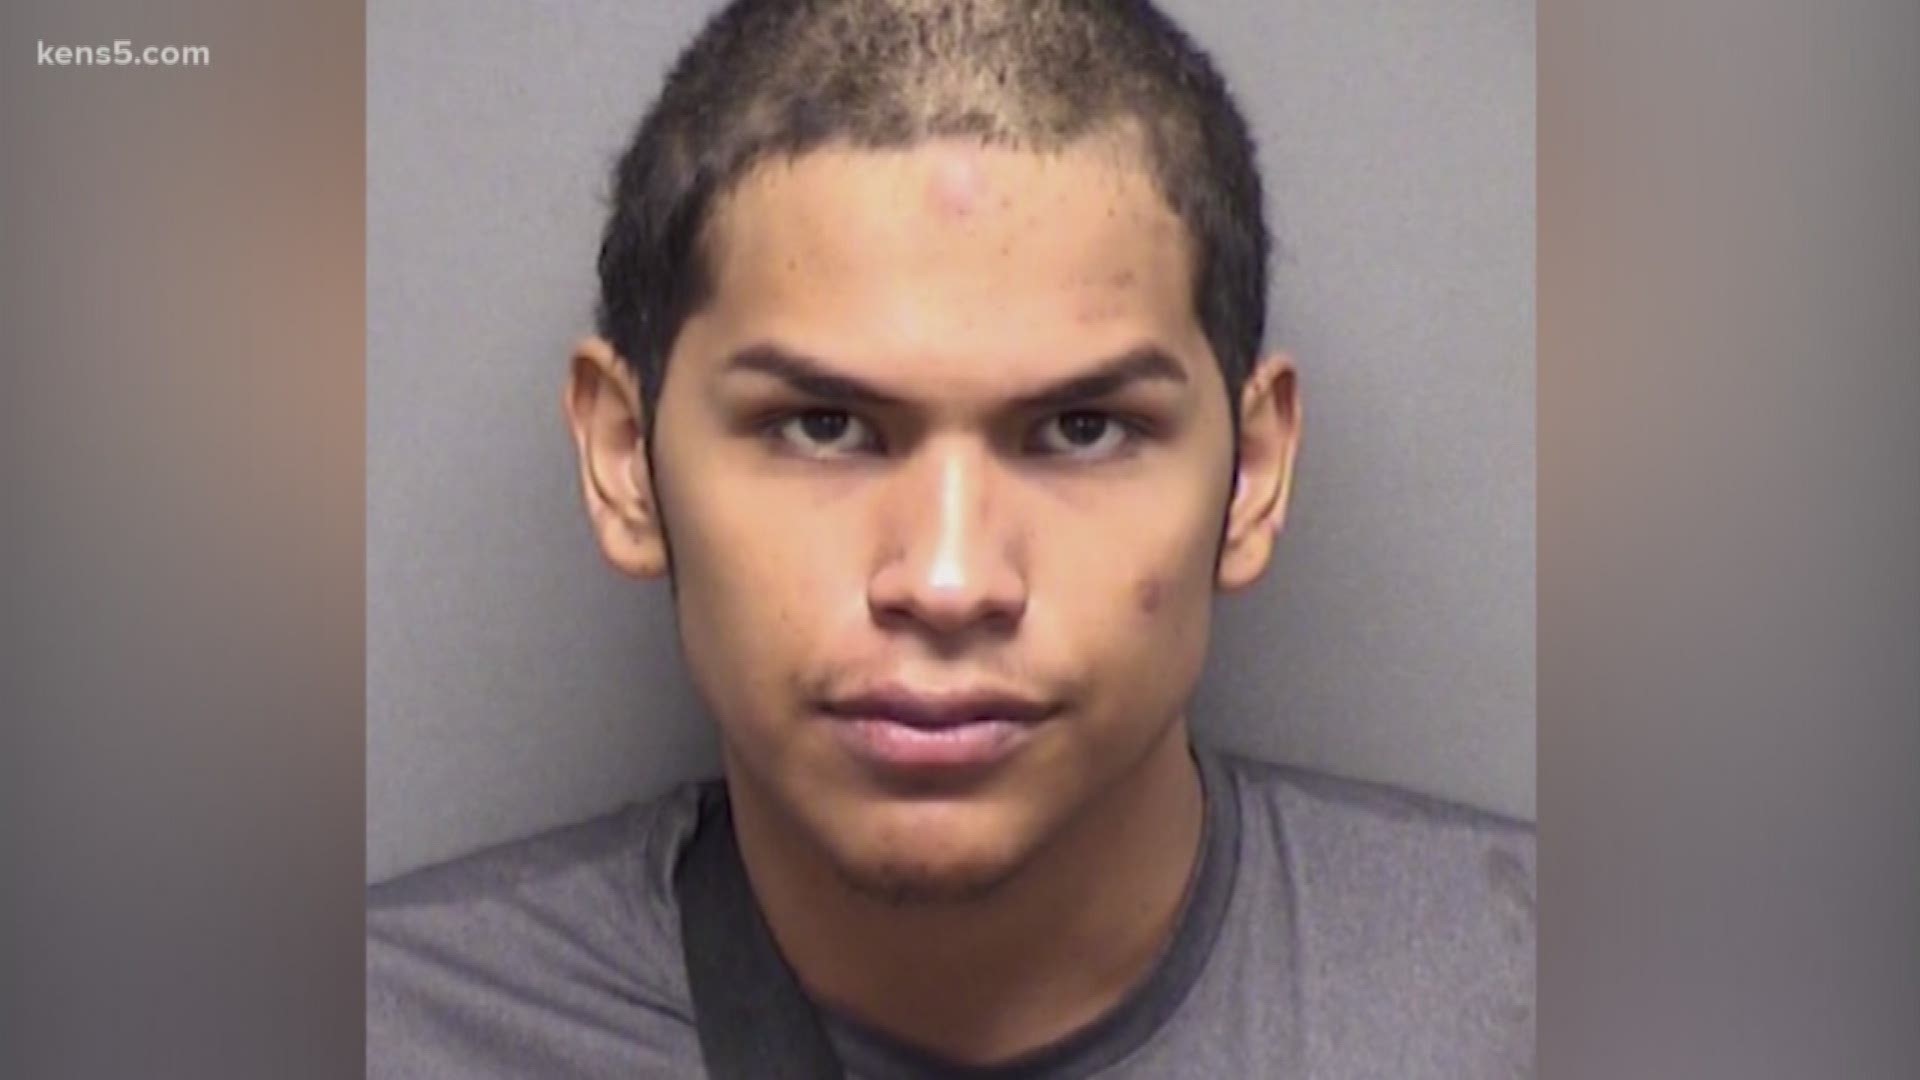 The San Antonio Police Department posted on Facebook Tuesday, saying that Devin Perez was in the area near Steves Avenue and New Braunfels Avenue on the southeast side. Perez was met apprehended by authorities in a gas station parking lot. Perez was injured during his arrest and was taken to a hospital for treatment.